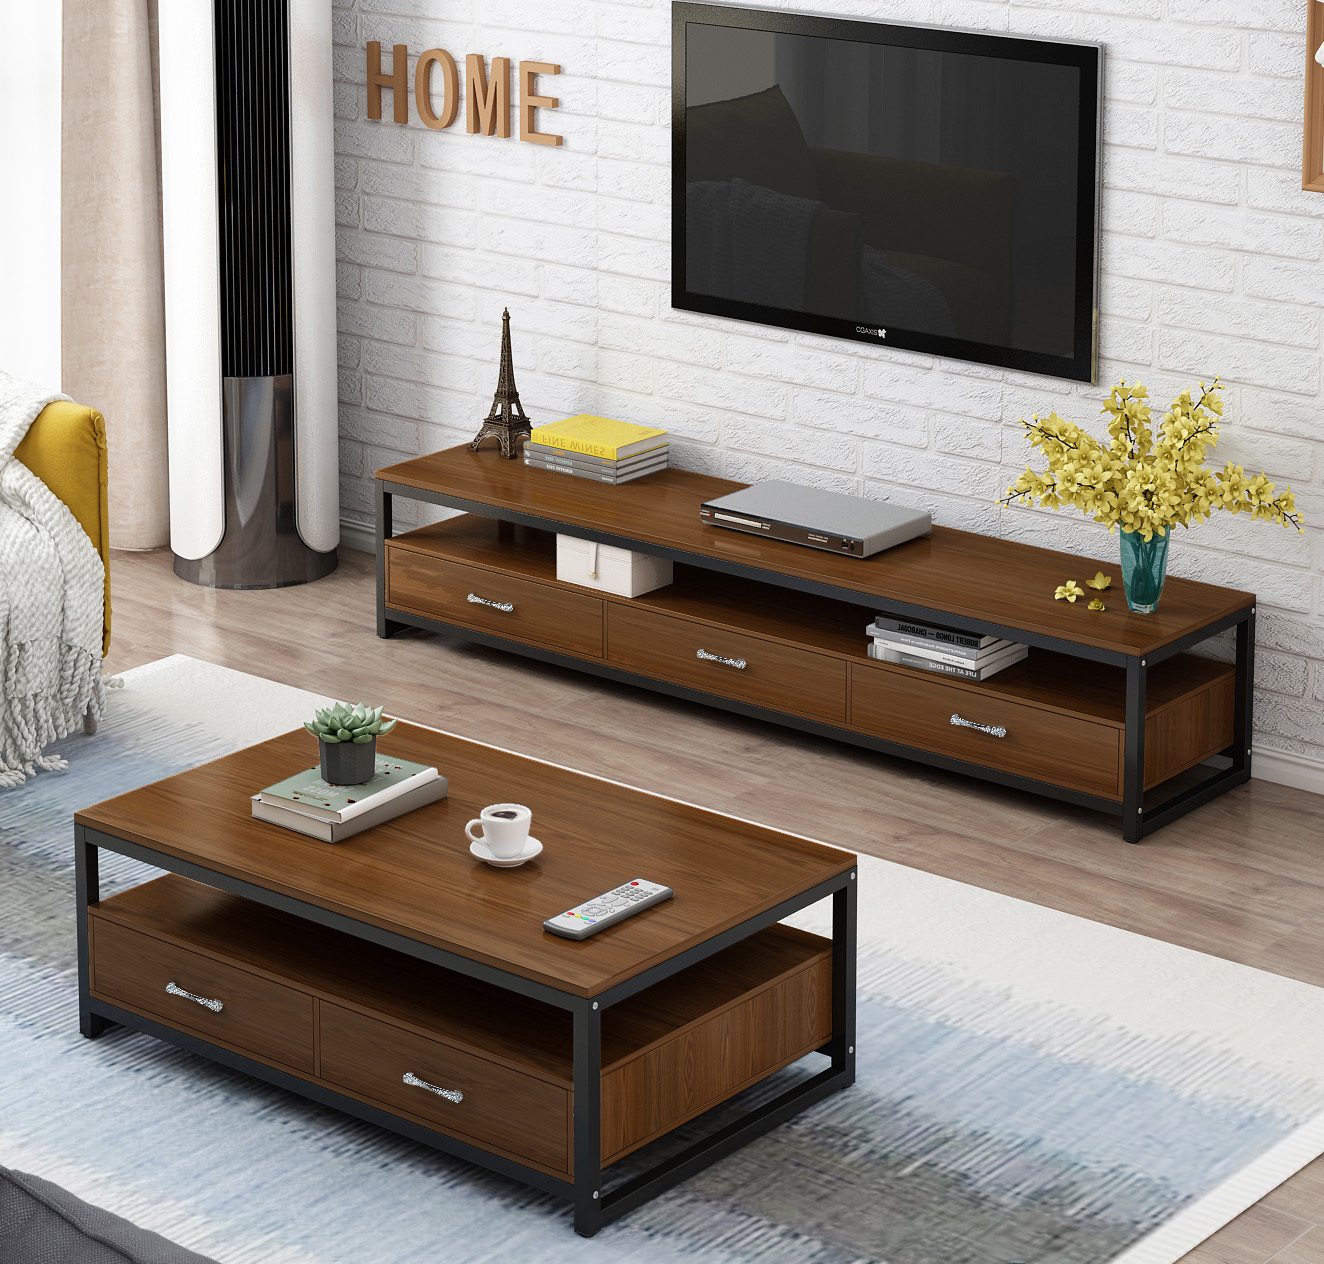 2-Piece Set Athena Coffee Table & TV Cabinet with Drawers (Walnut)